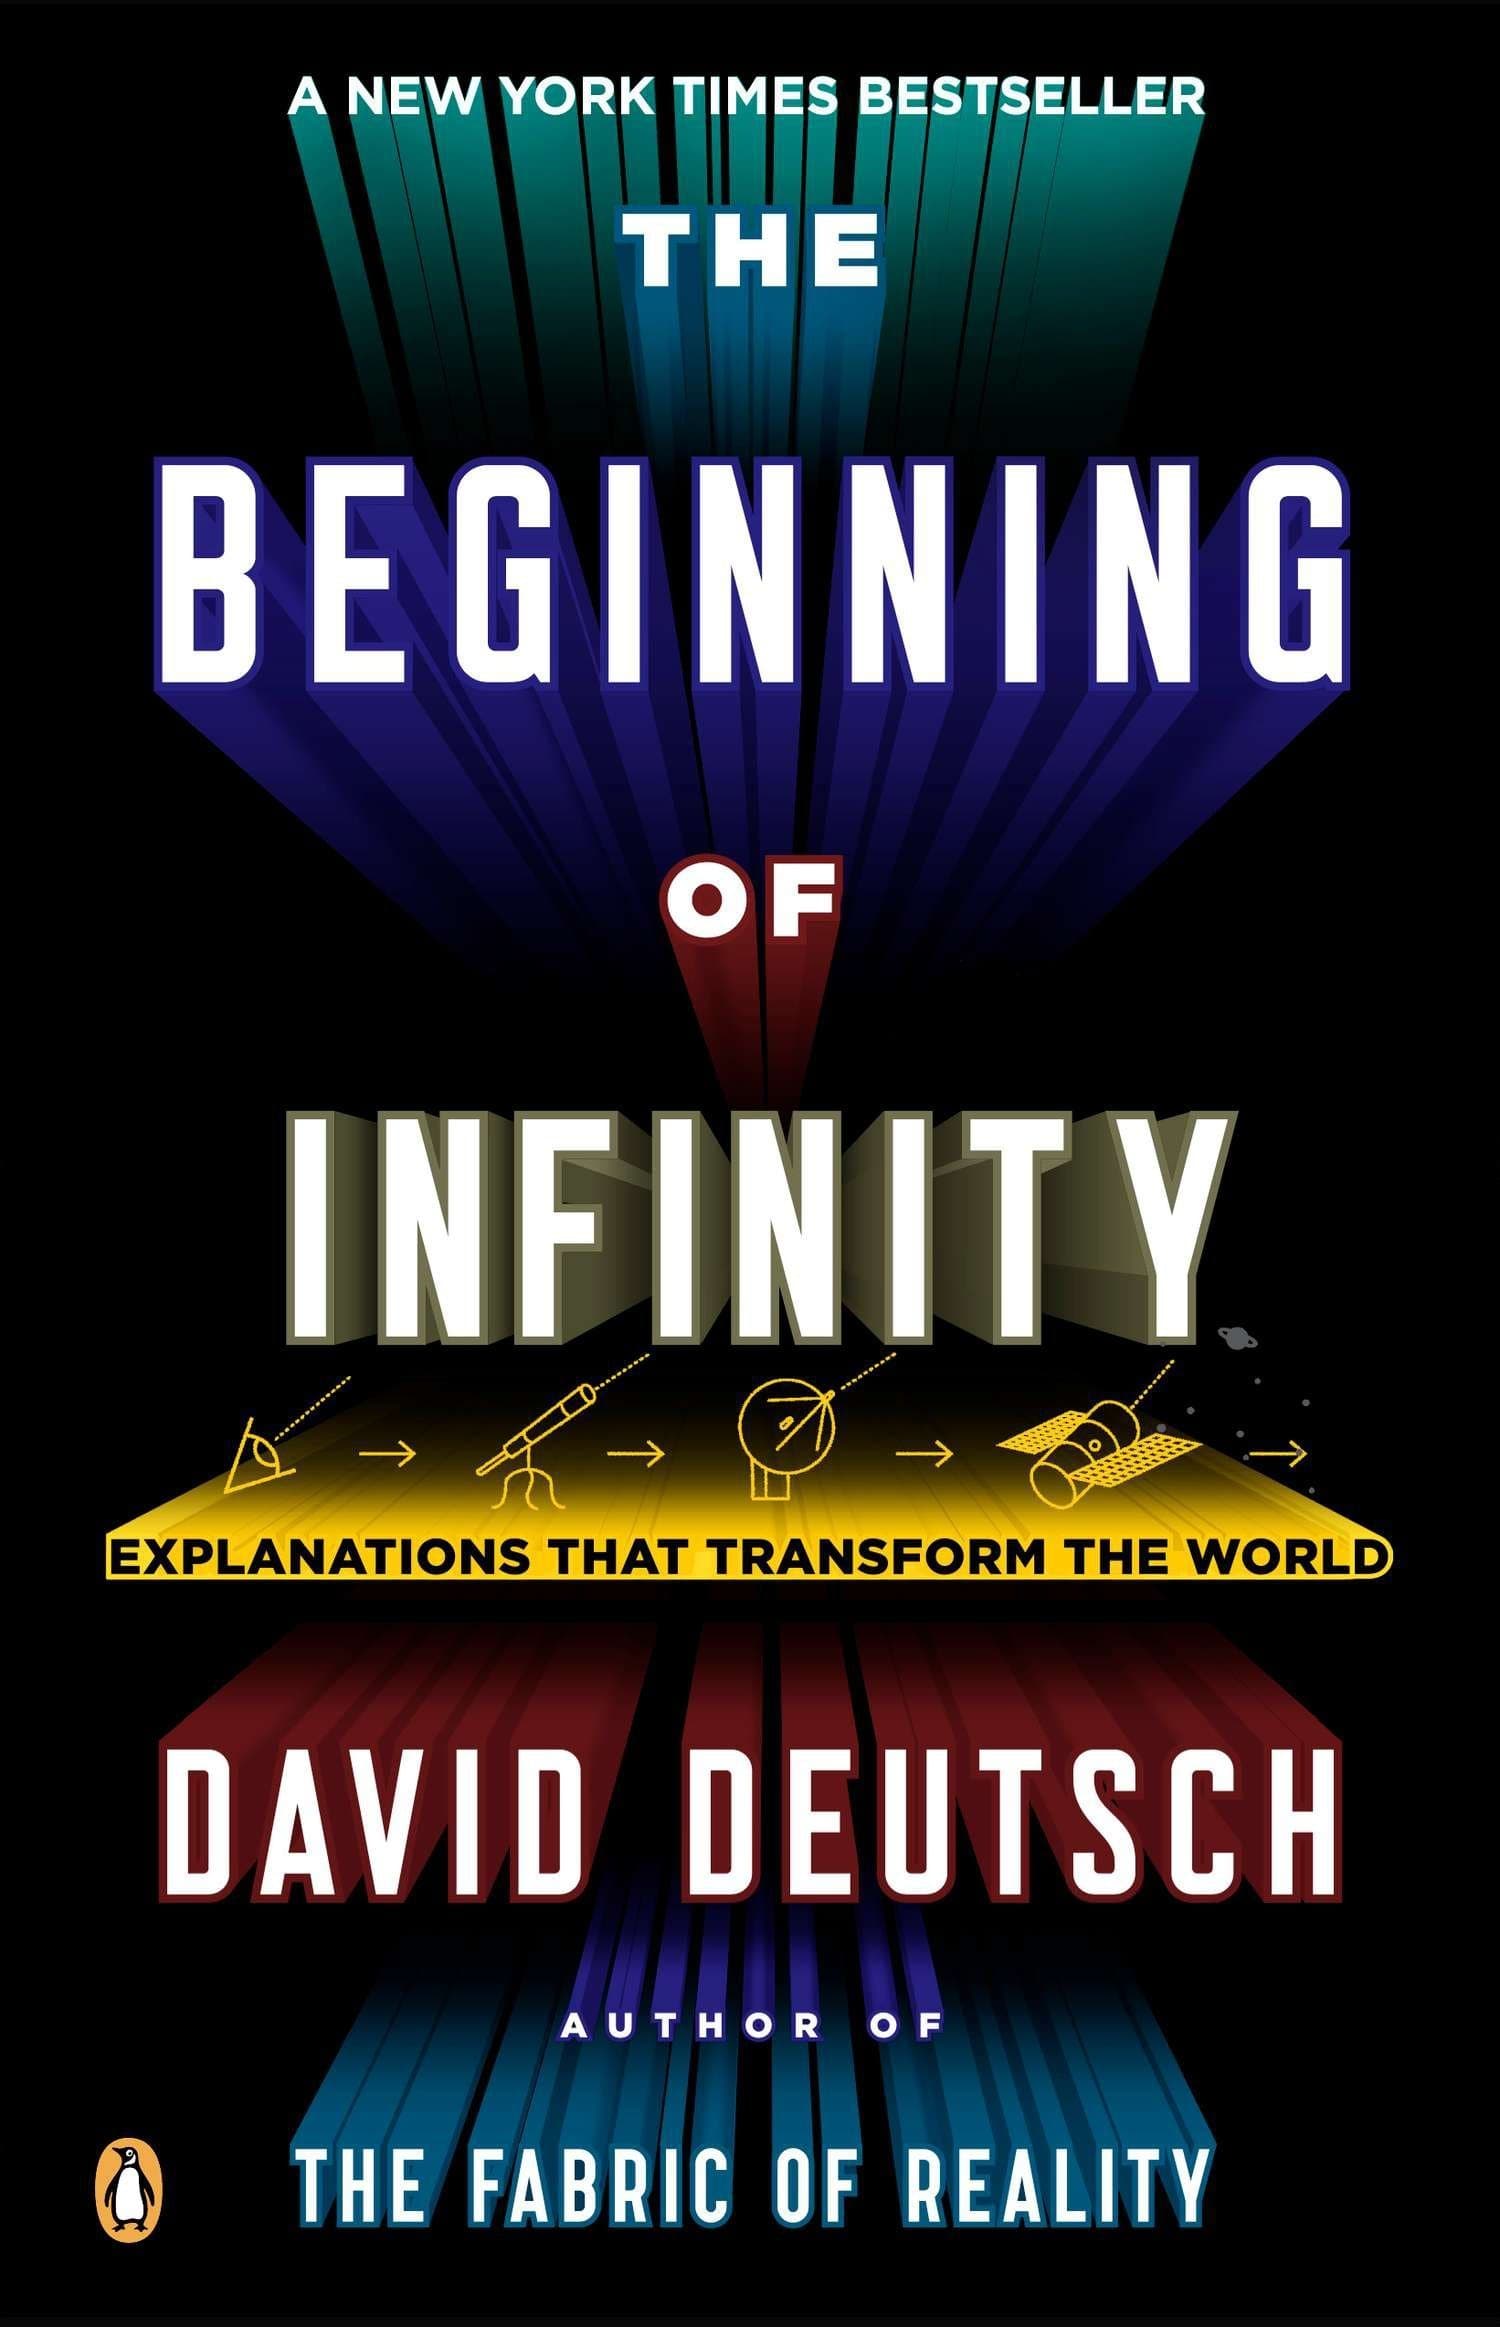 The Beginning of Infinity: Explanations That Transform the World by David Deutsch  